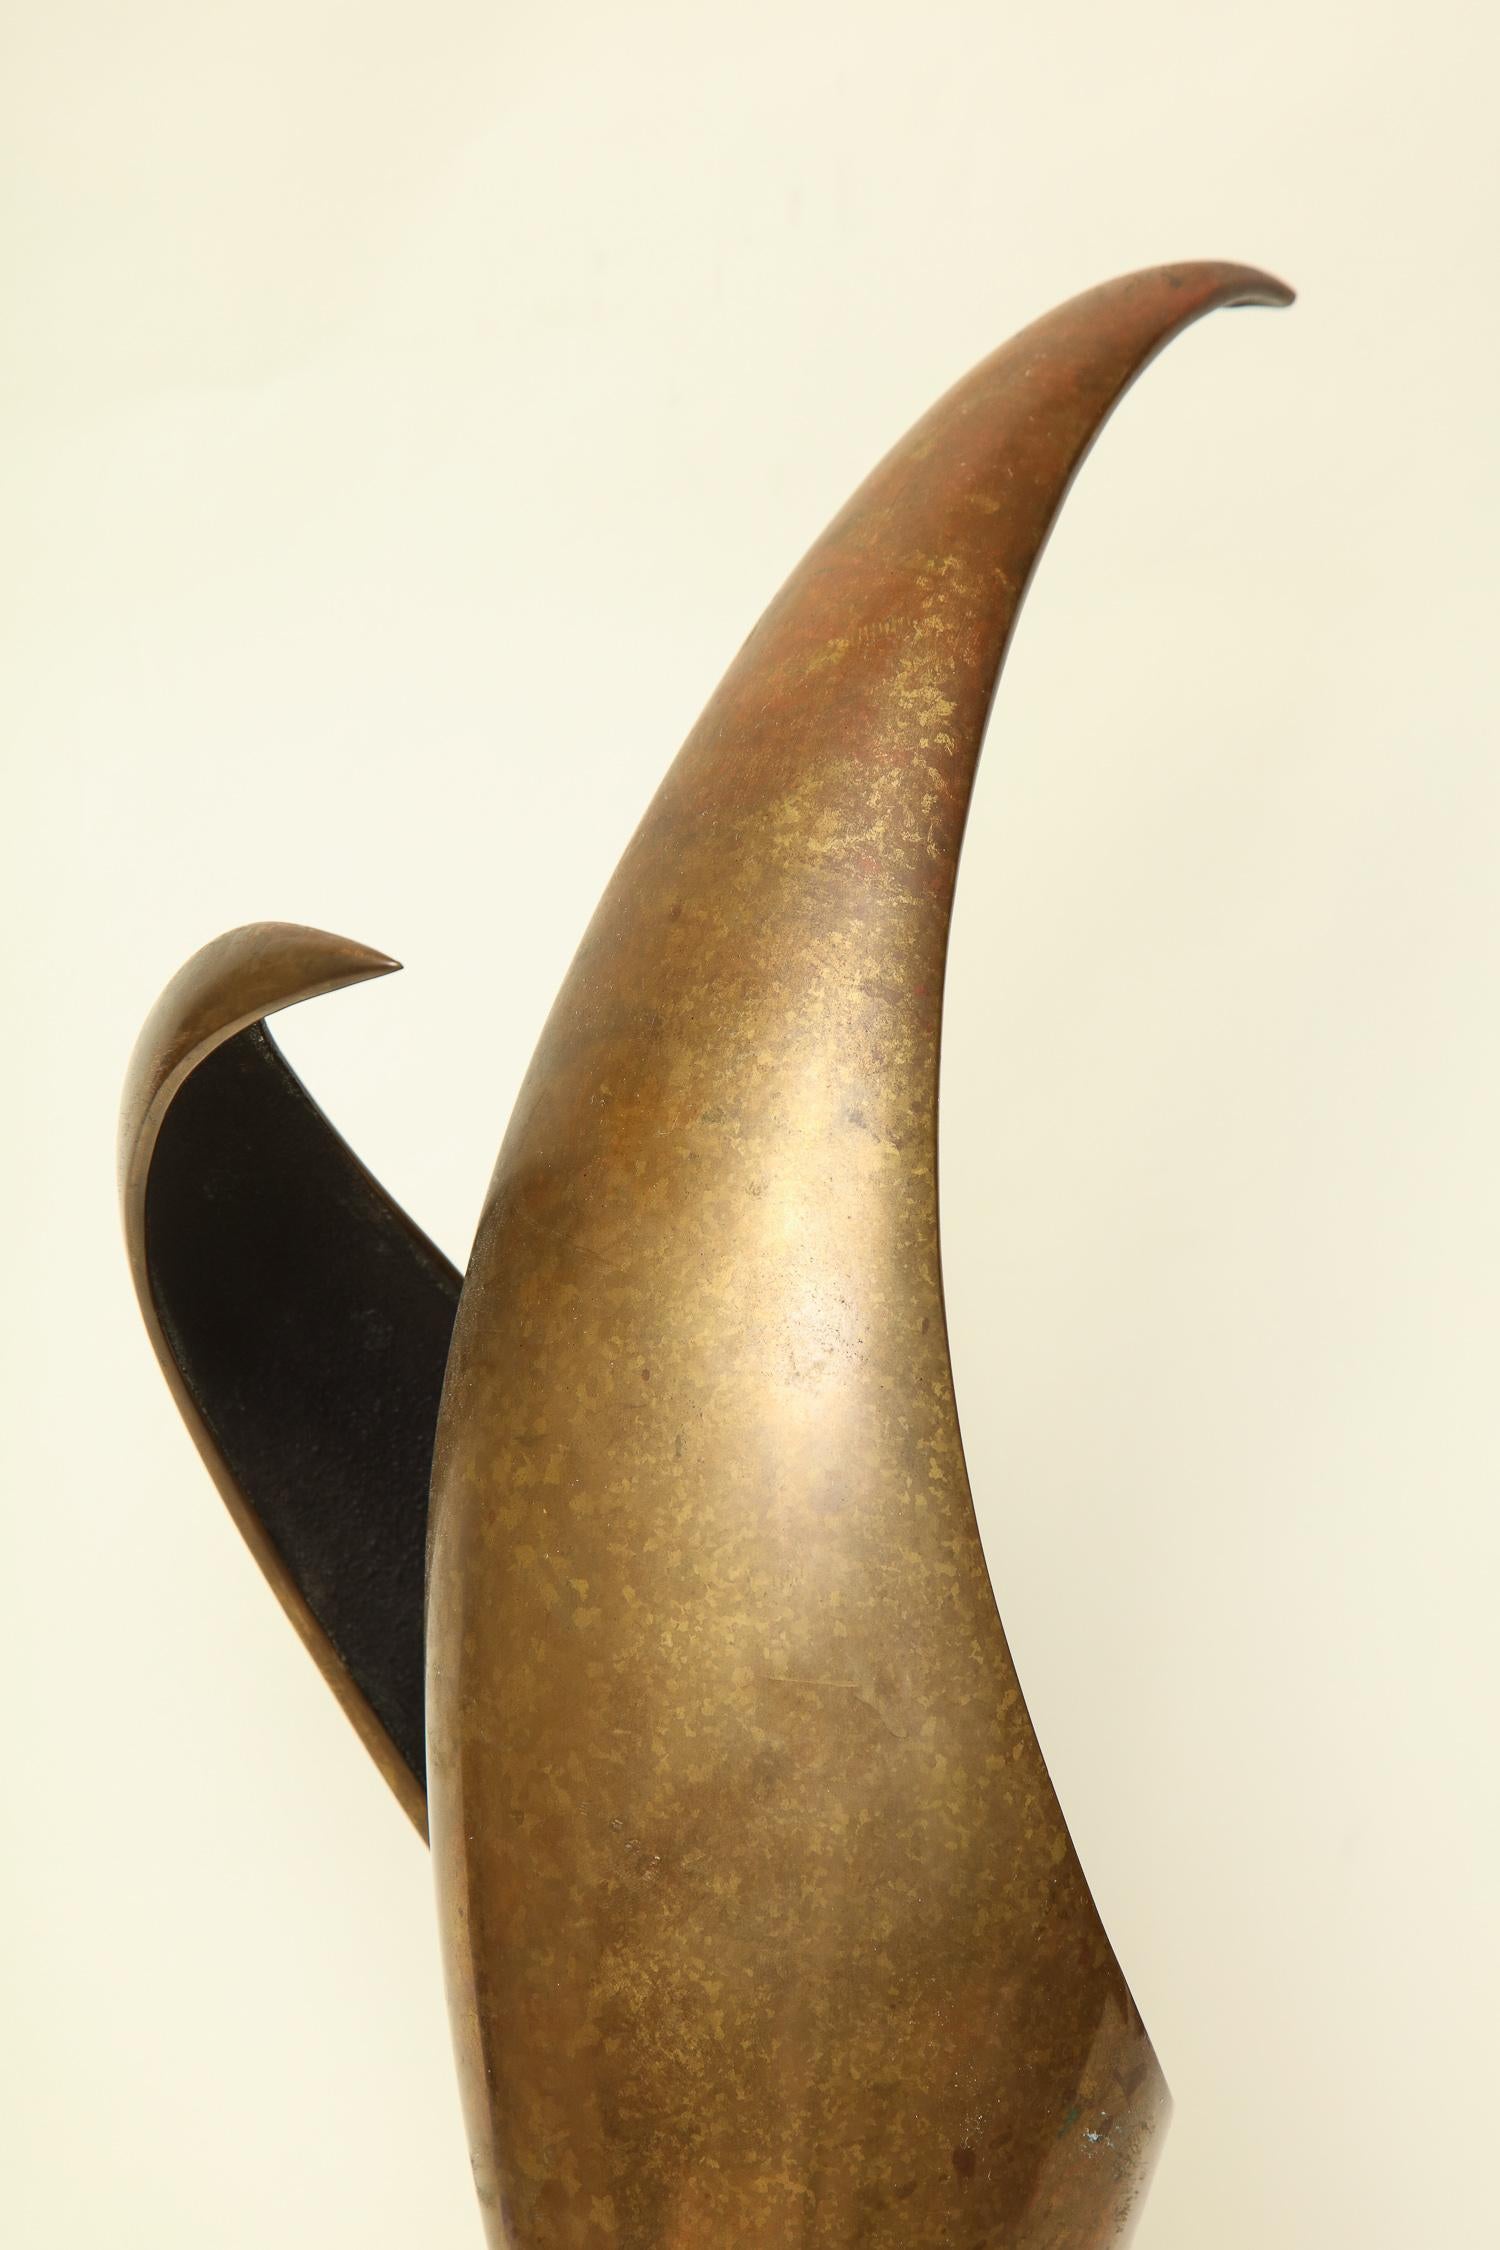 Sculpture abstract patinated bronze Mid-Century Modern, 1960s.